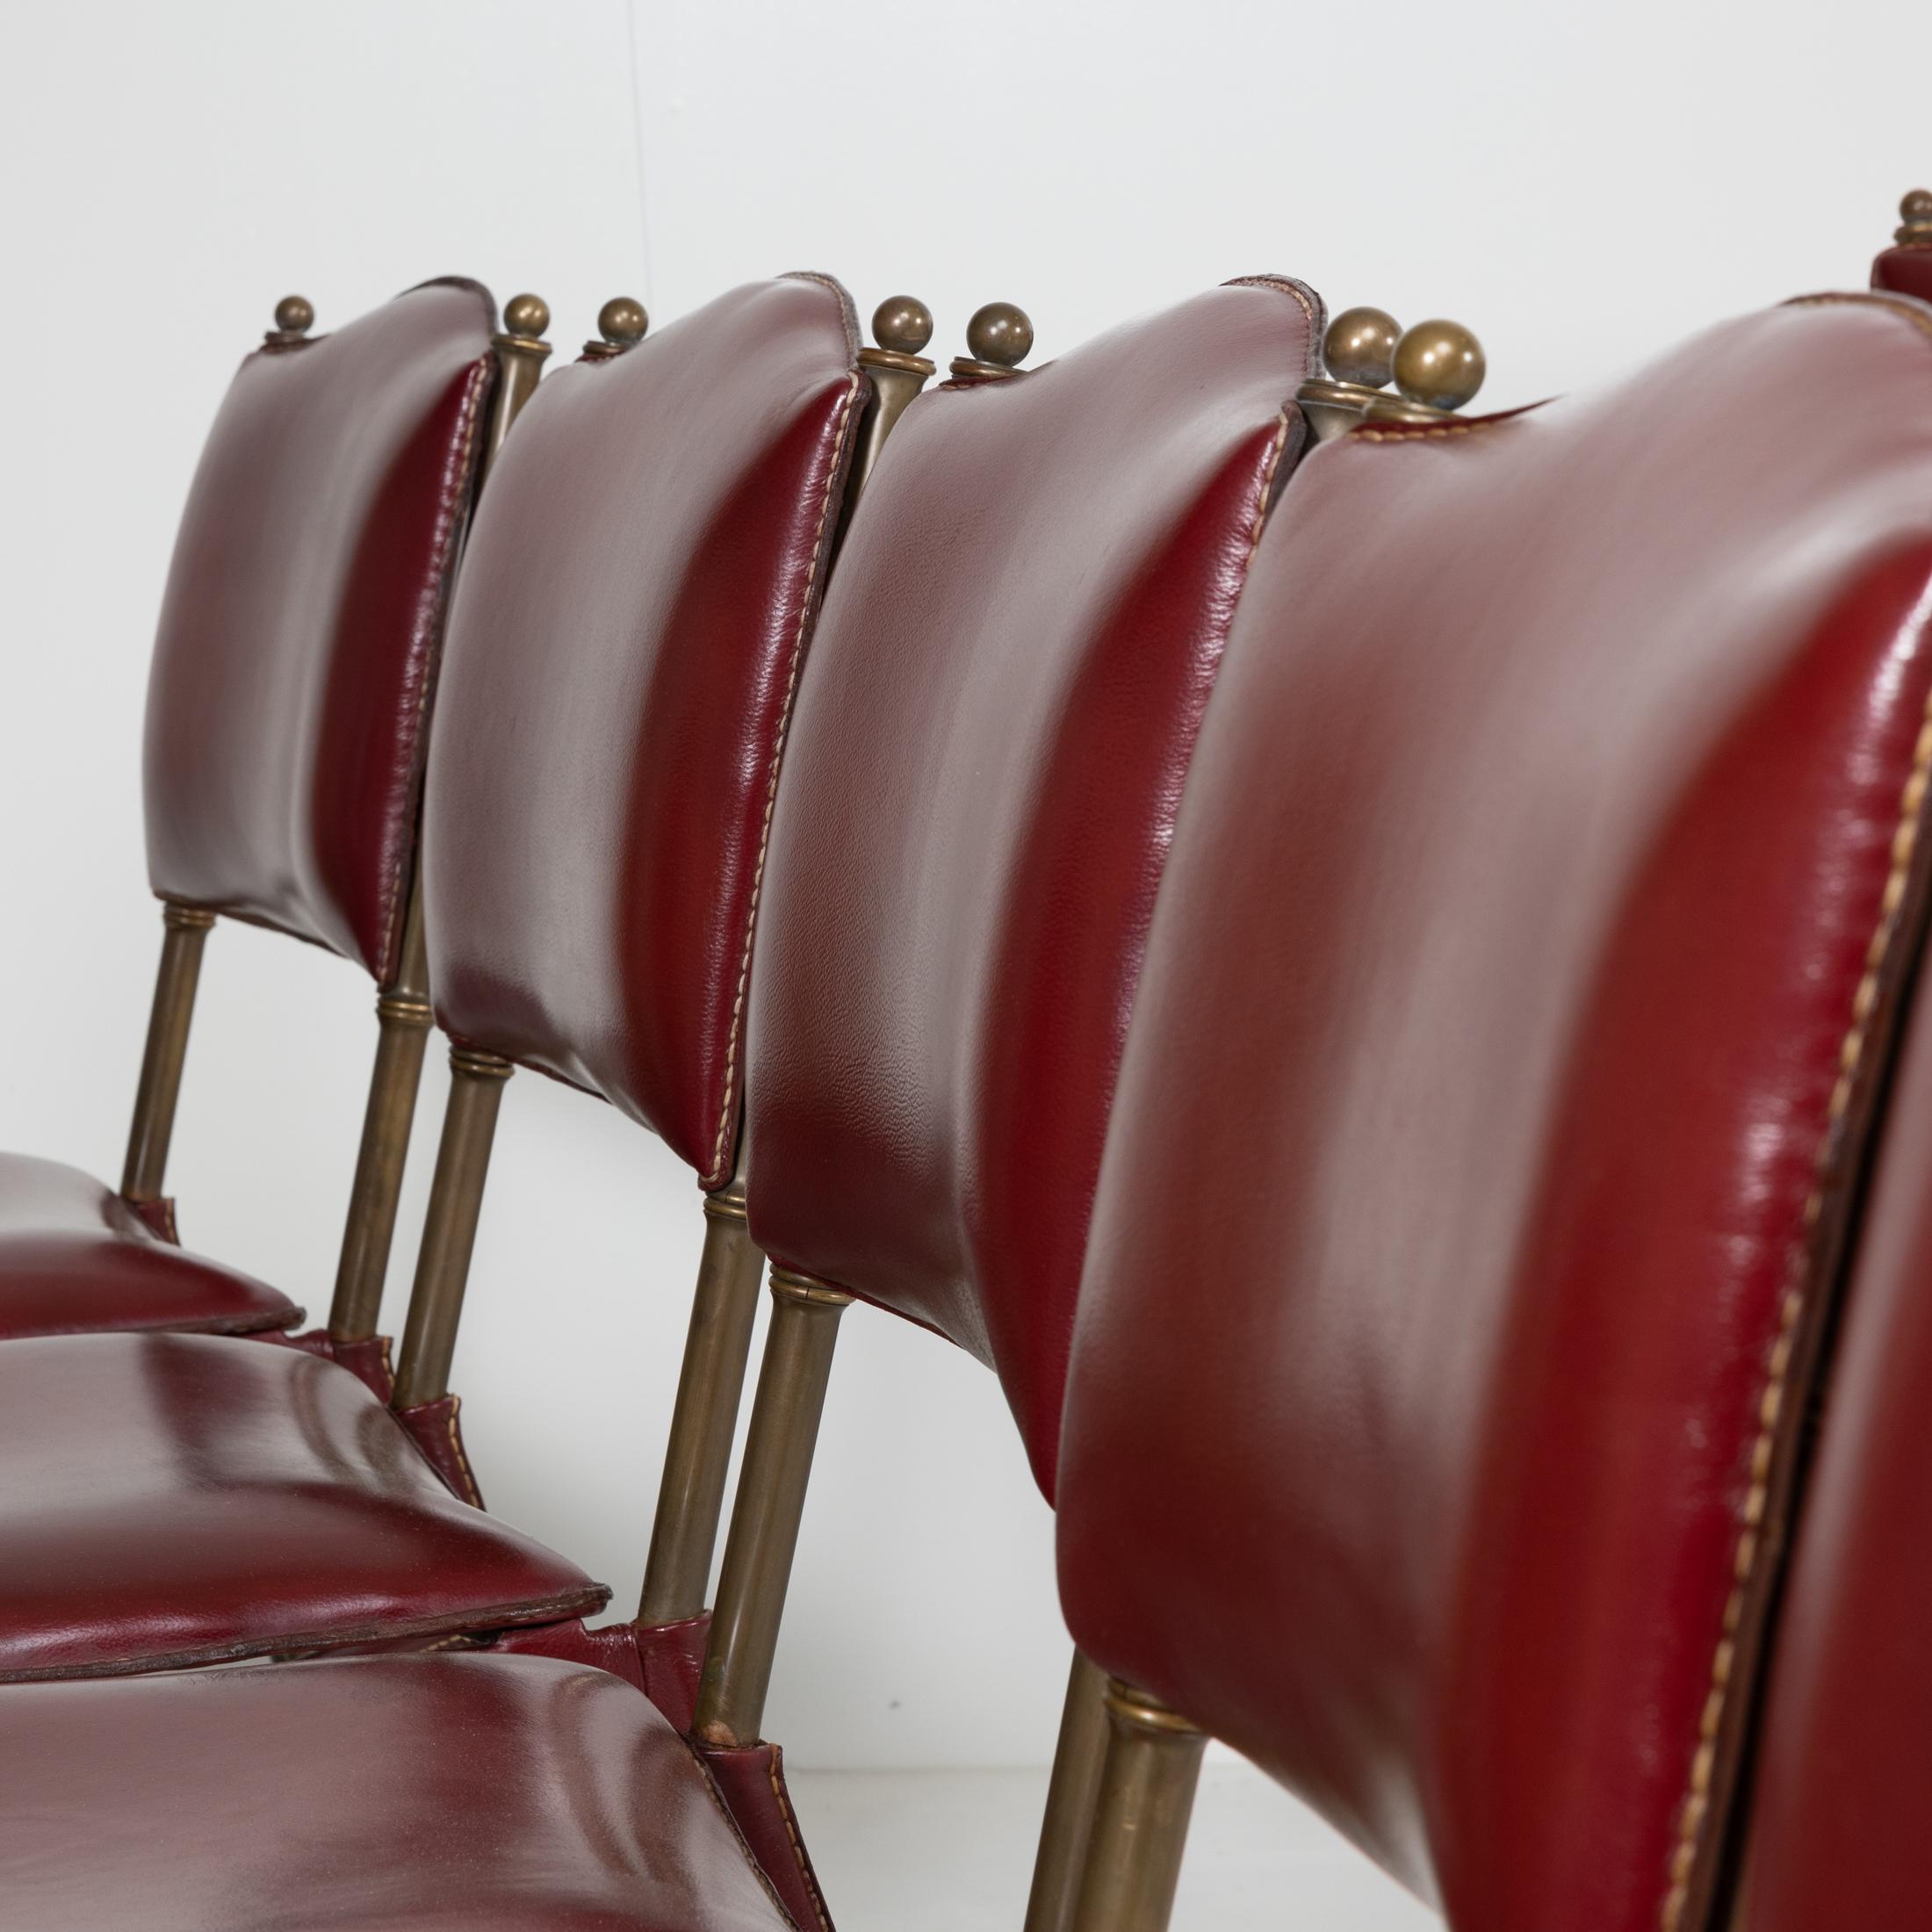 Mid-Century Modern Set of 12 Saddle Stitched Red Leather Chairs by Jacques Adnet, France For Sale